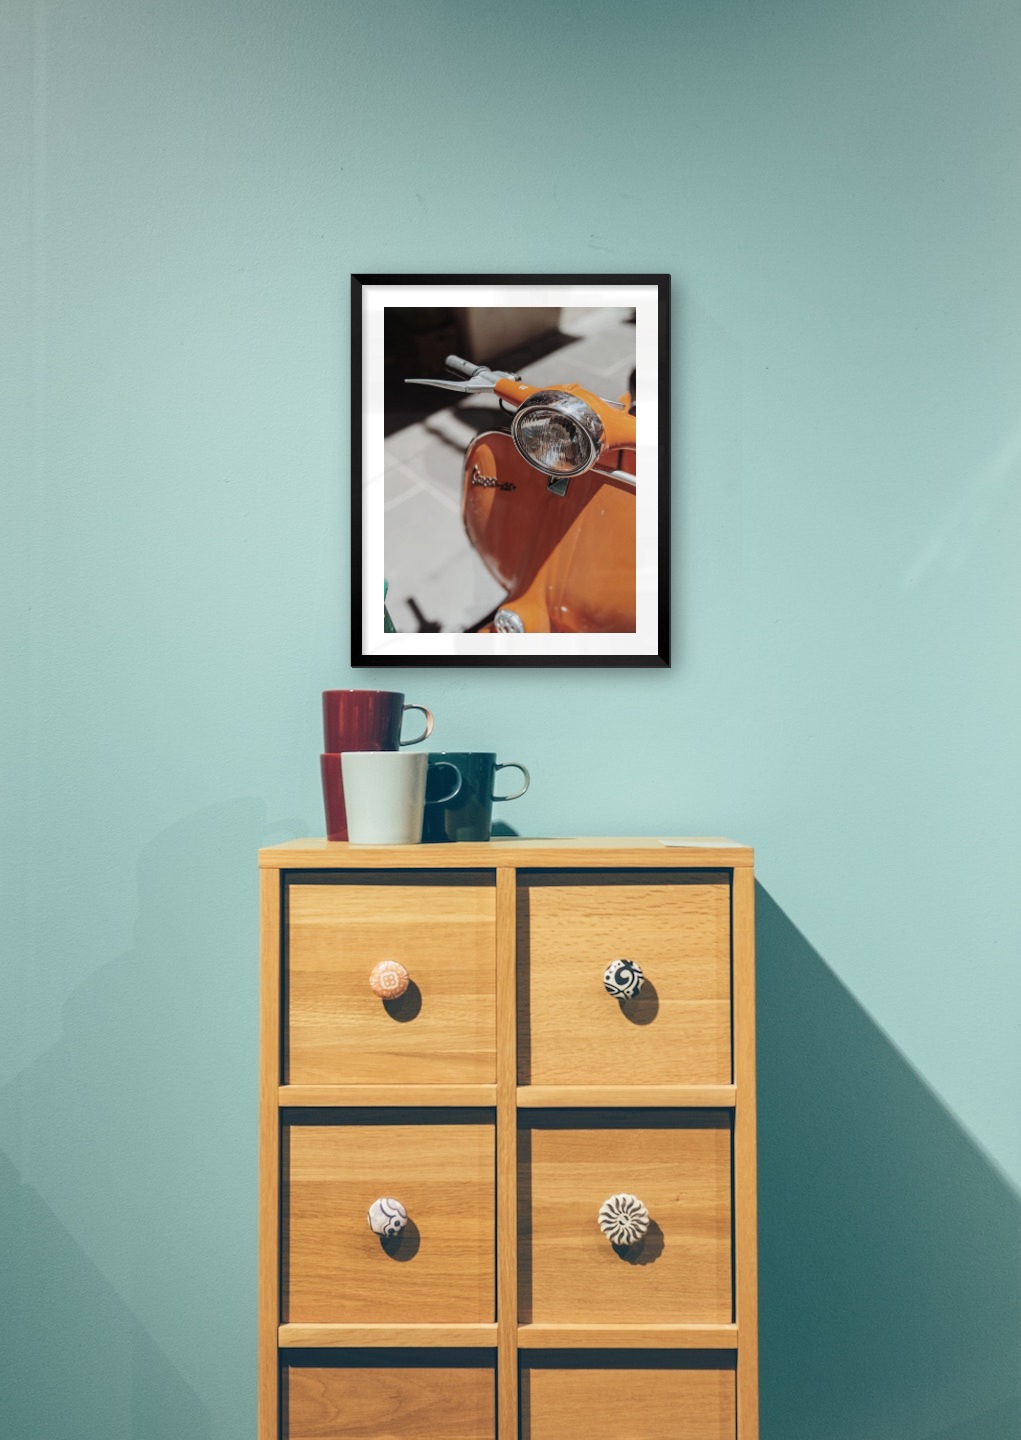 Gallery wall with picture frame in black in size 40x50 with print "Orange vespa"